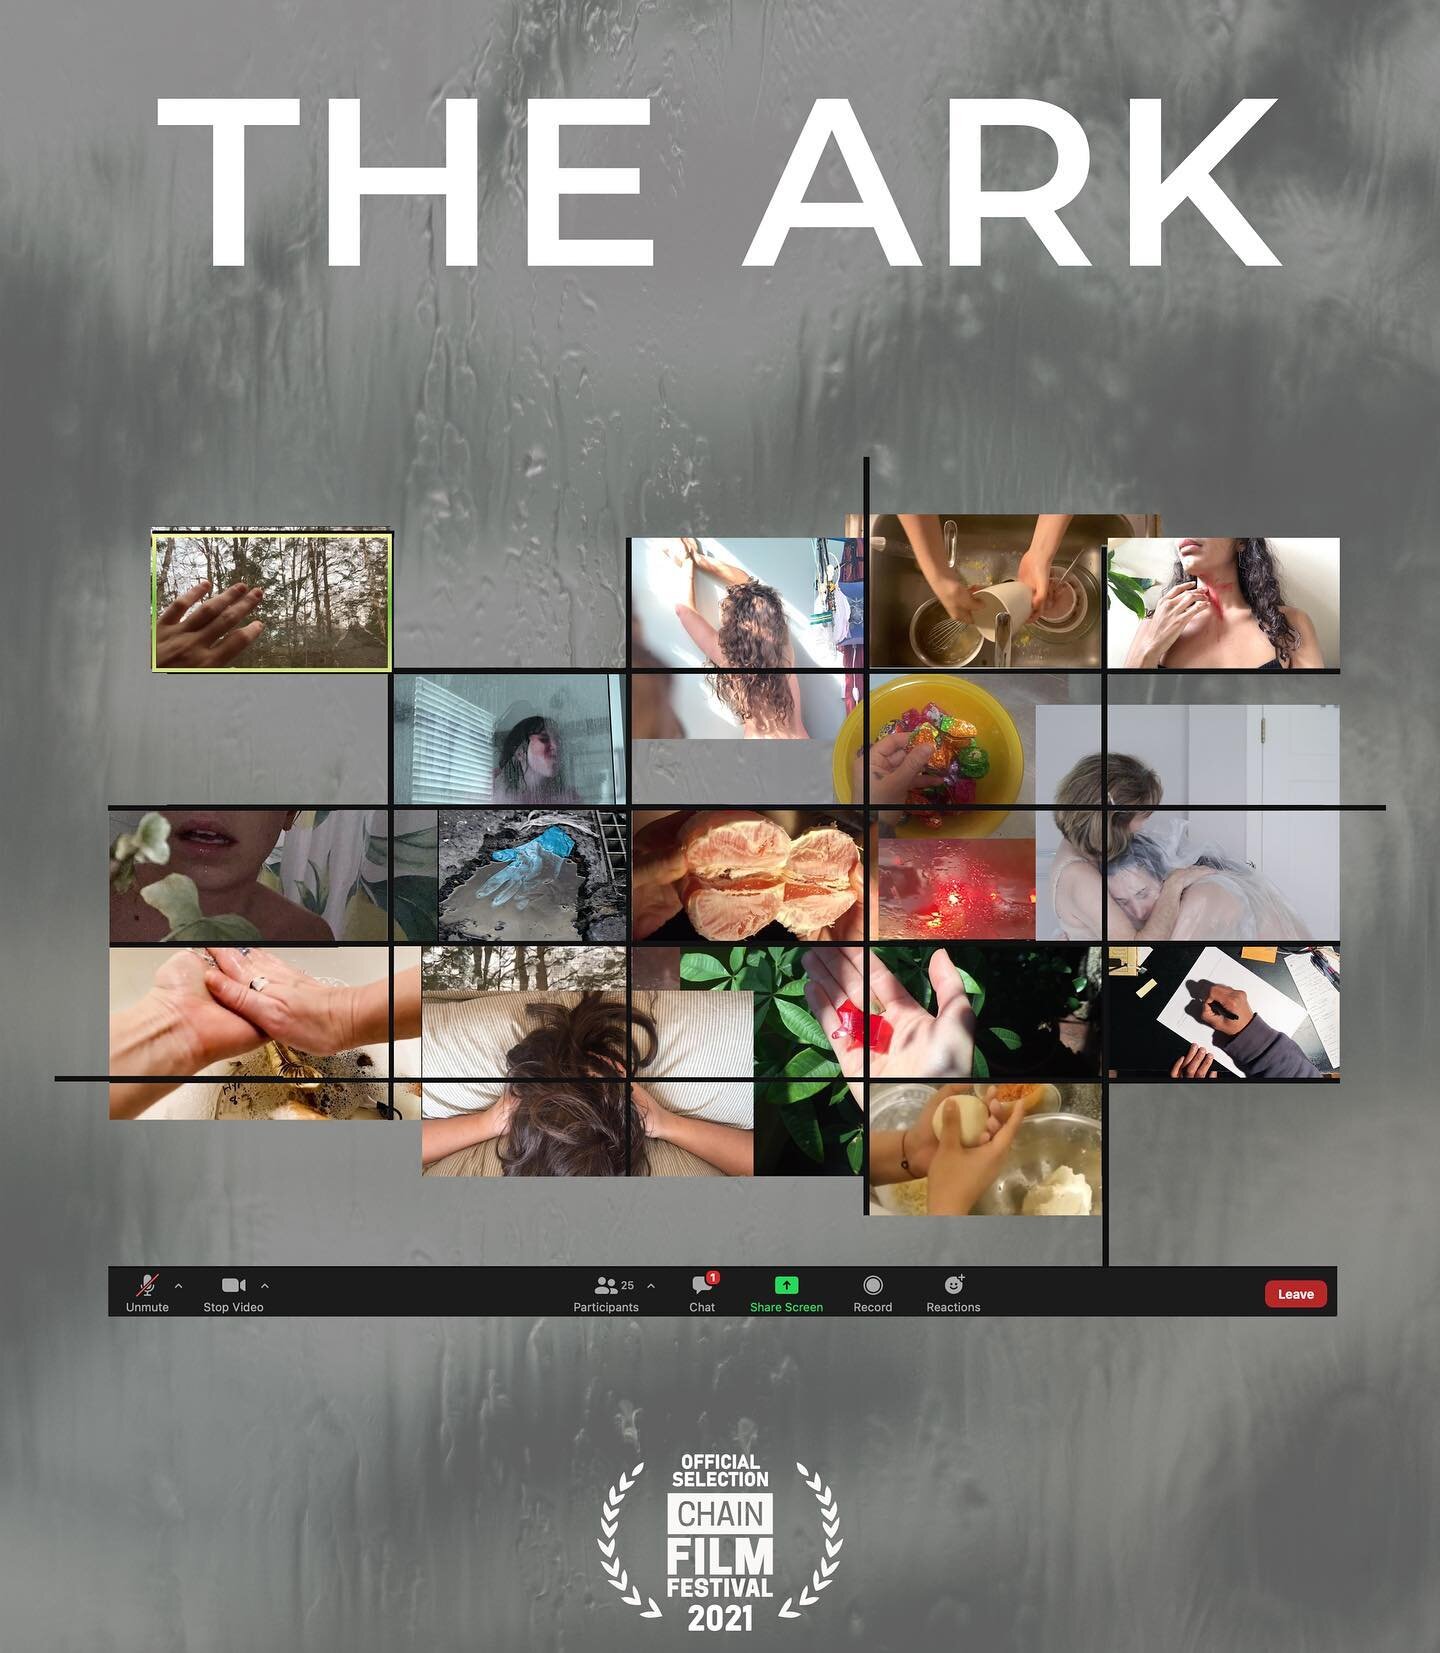 Community! @wellofwillscollective is excited to announce that The Ark was selected to screen at @chainfilmfest here in our hometown NYC *August 28th, 2pm*! That means we can all watch it together on THE BIG SCREEN!!! Link to purchase tix are in our b